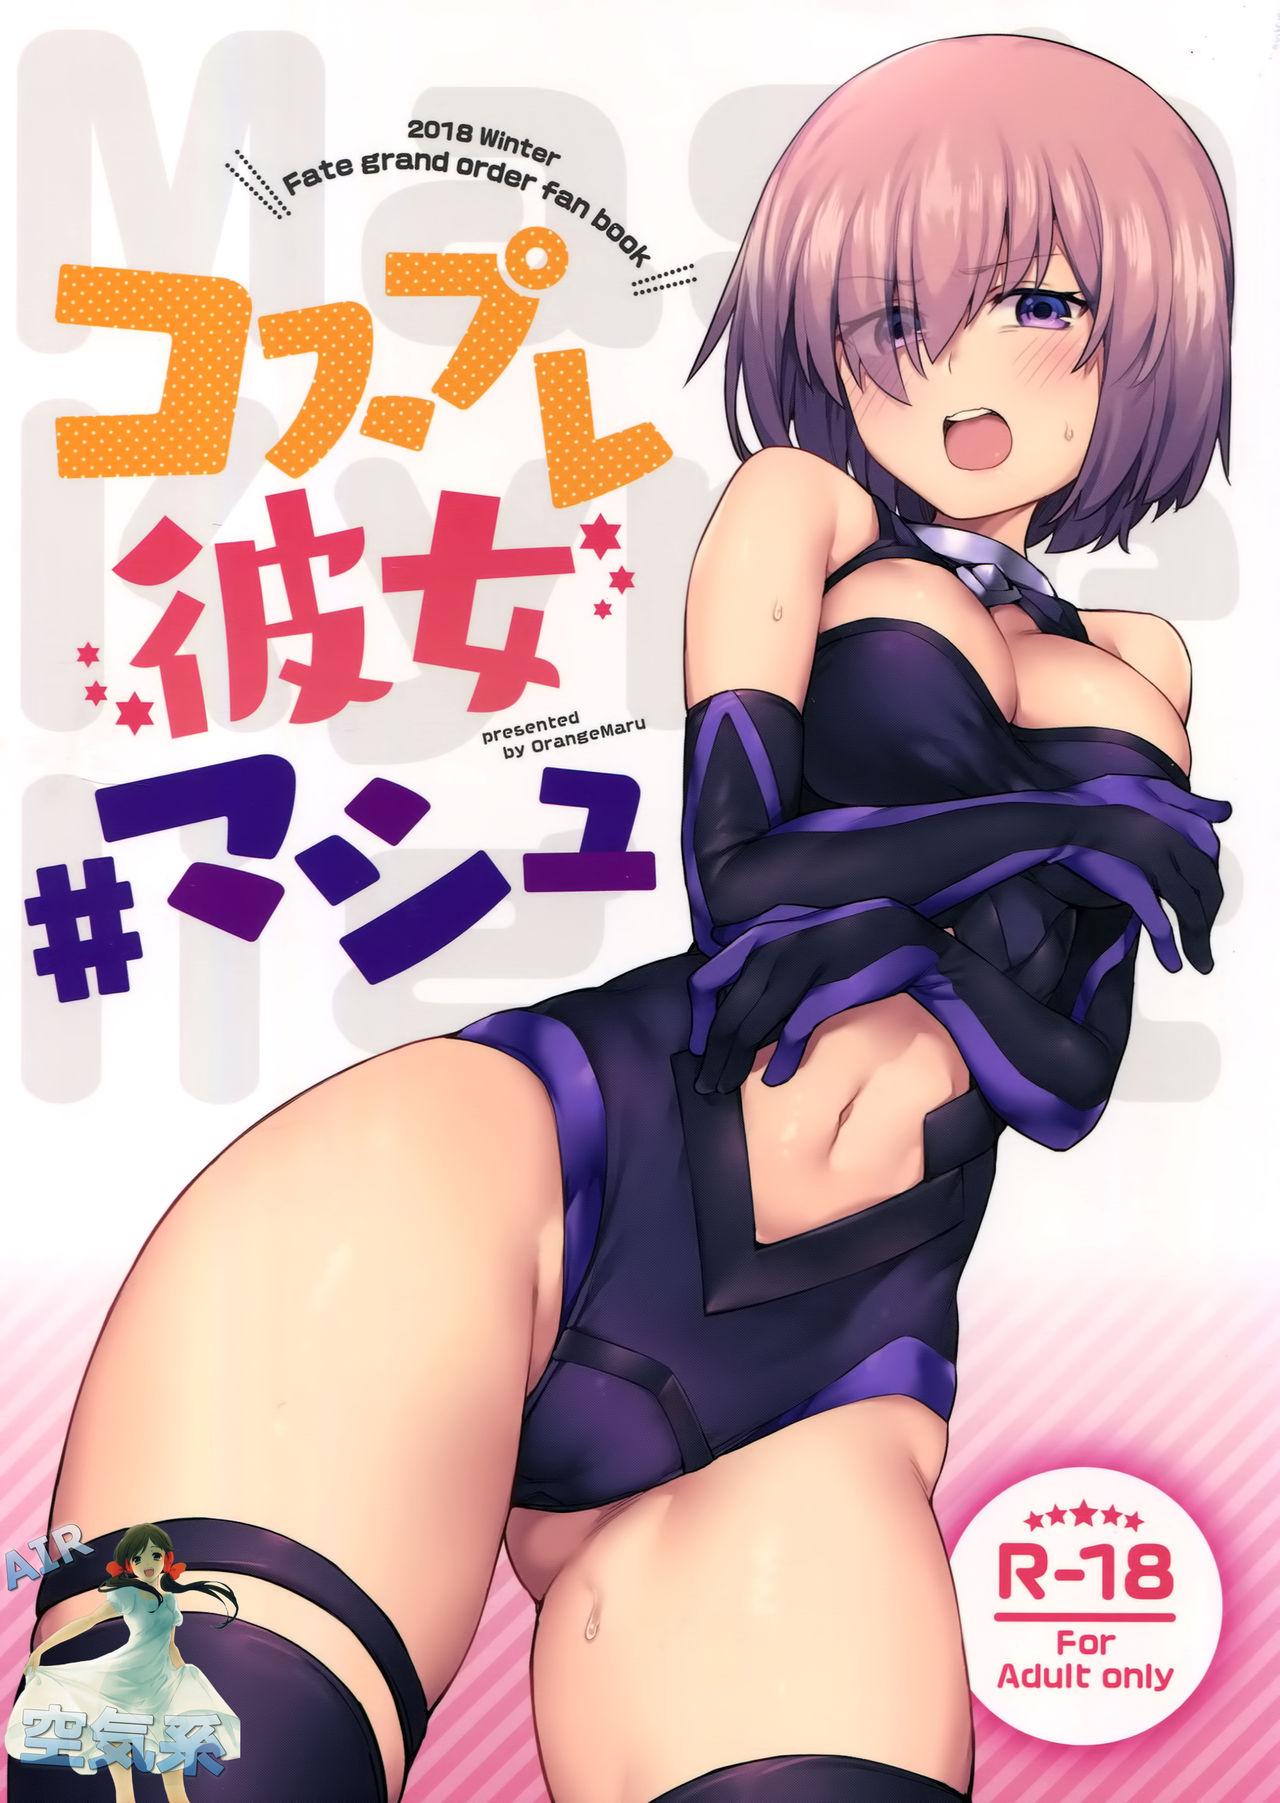 Cuzinho Cosplay Kanojo #Mash - Fate grand order Couple Porn - Page 2